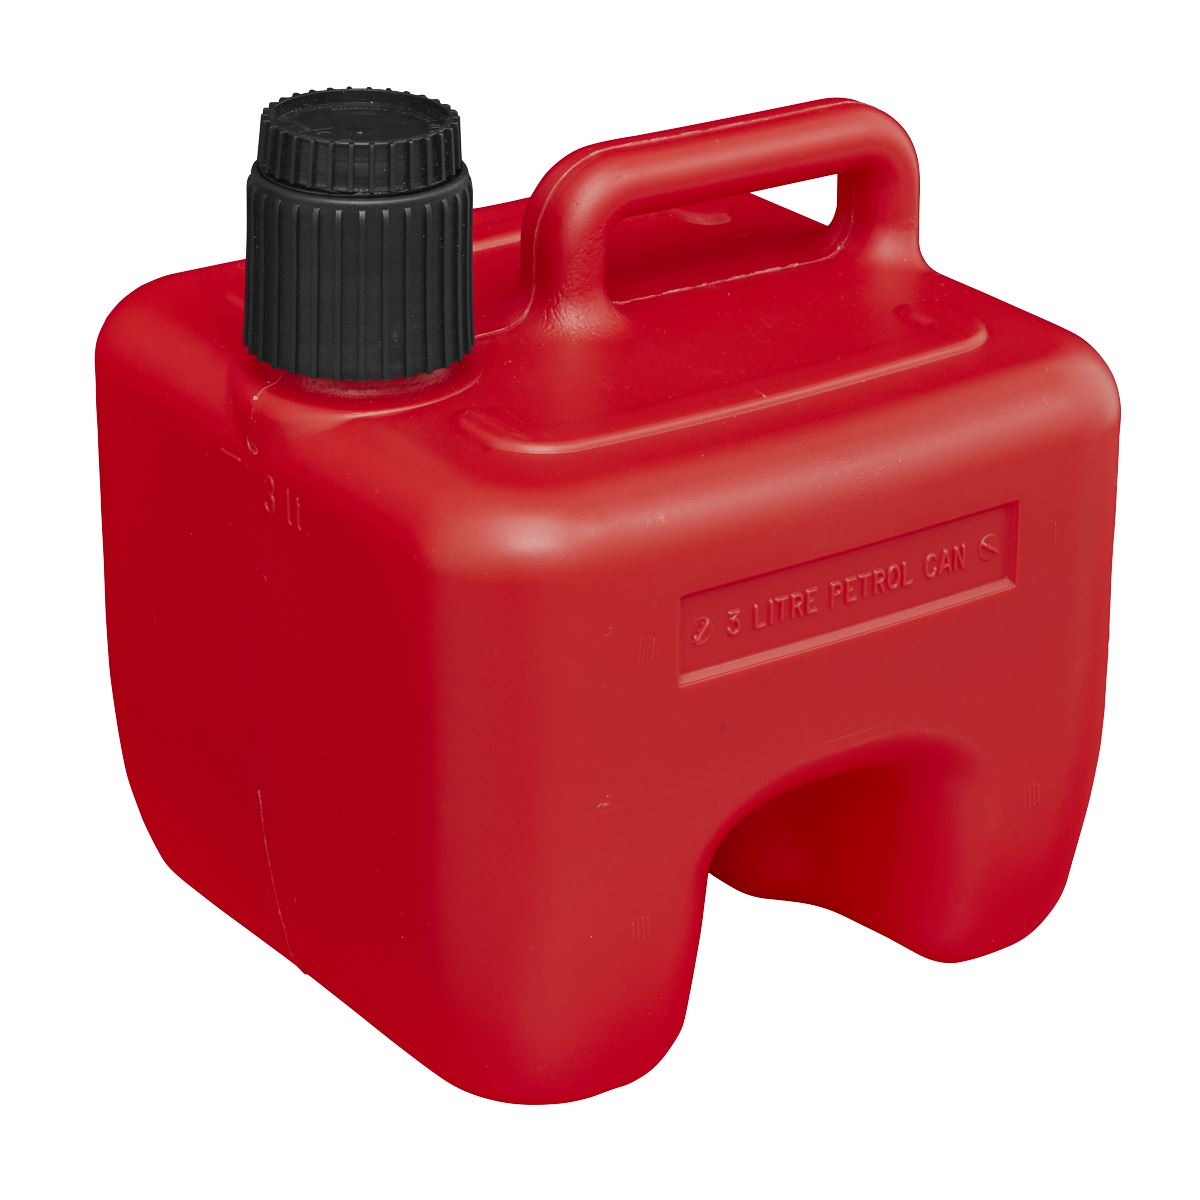 Sealey Stackable Fuel Can 3L - Red